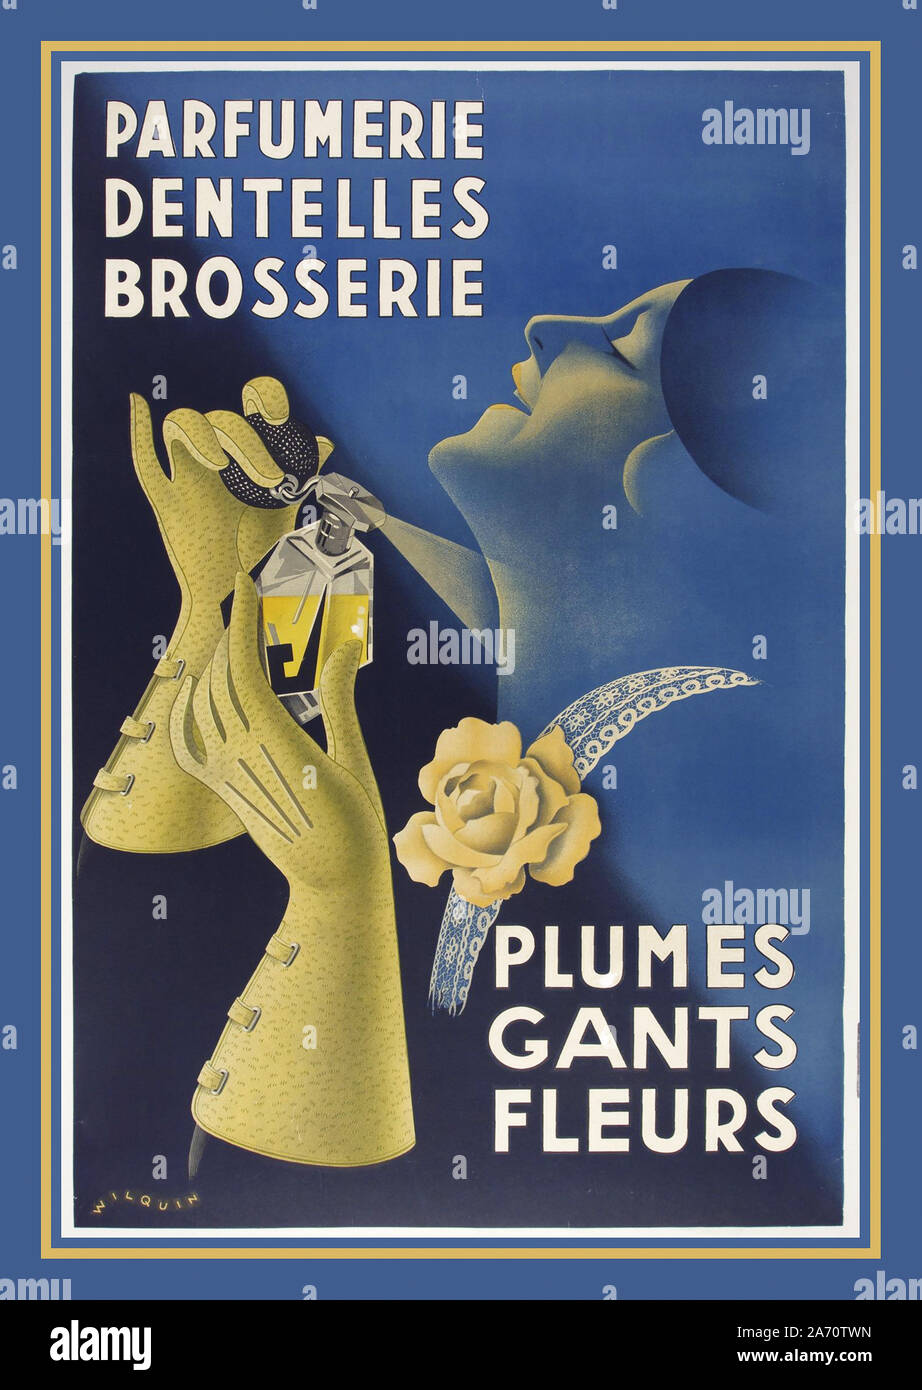 Vintage 1900's French advertising poster aimed at women 'Parfumerie Dentelles Brosserie' Vintage Poster by Wilquin, 1920  brosserie, dentelles, fleurs, gants, parfüm, parfumerie, plumes, 'brush, lace, flowers, gloves, perfume feathers', France Stock Photo